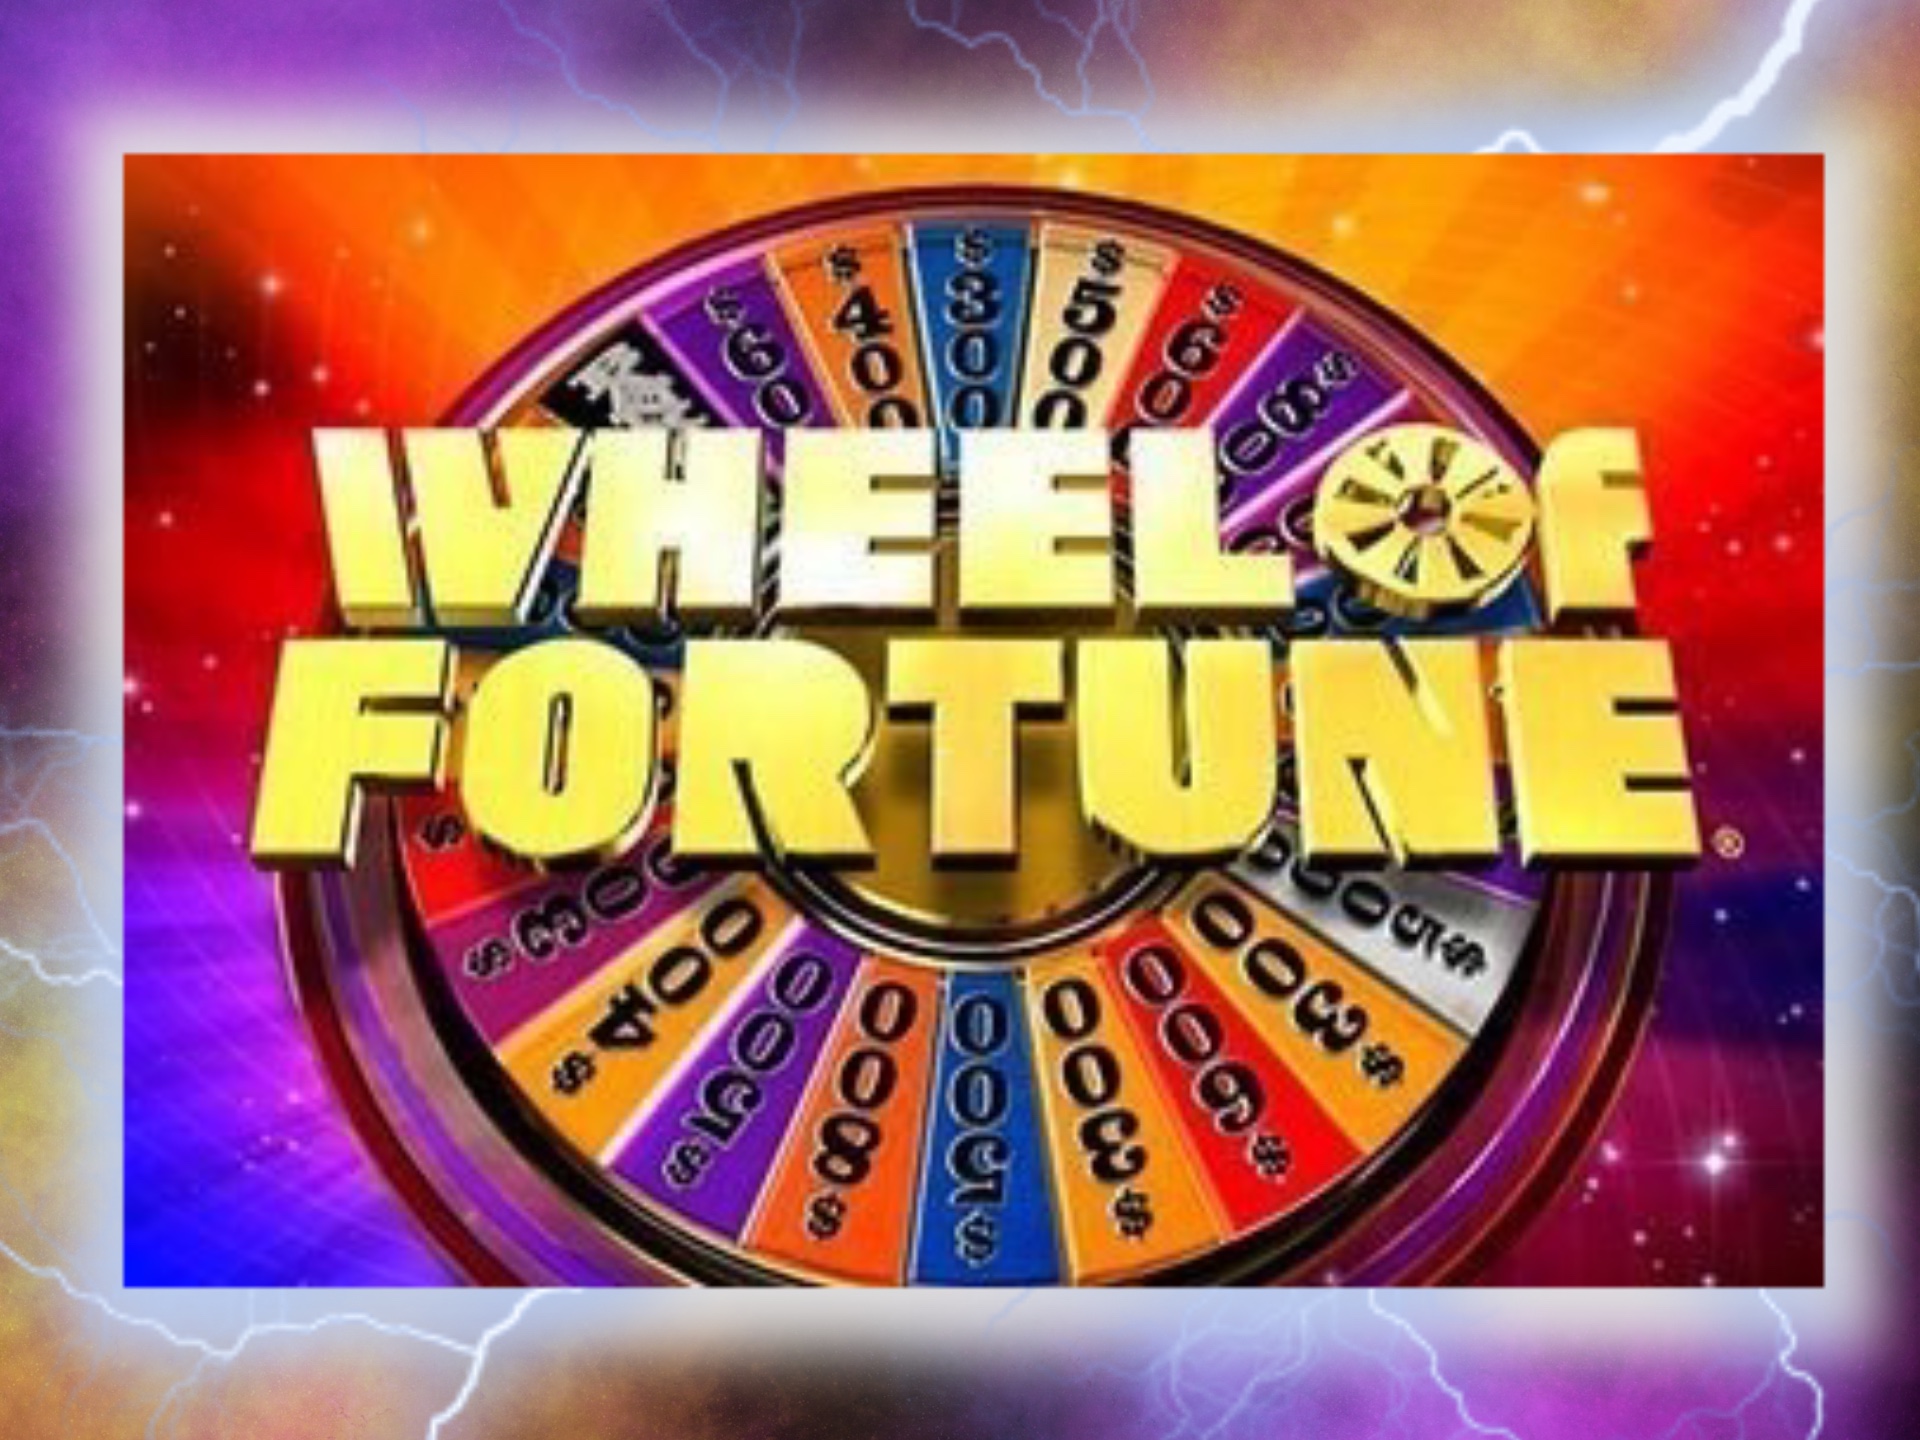 Another famous online slot that is available at almost every casino.